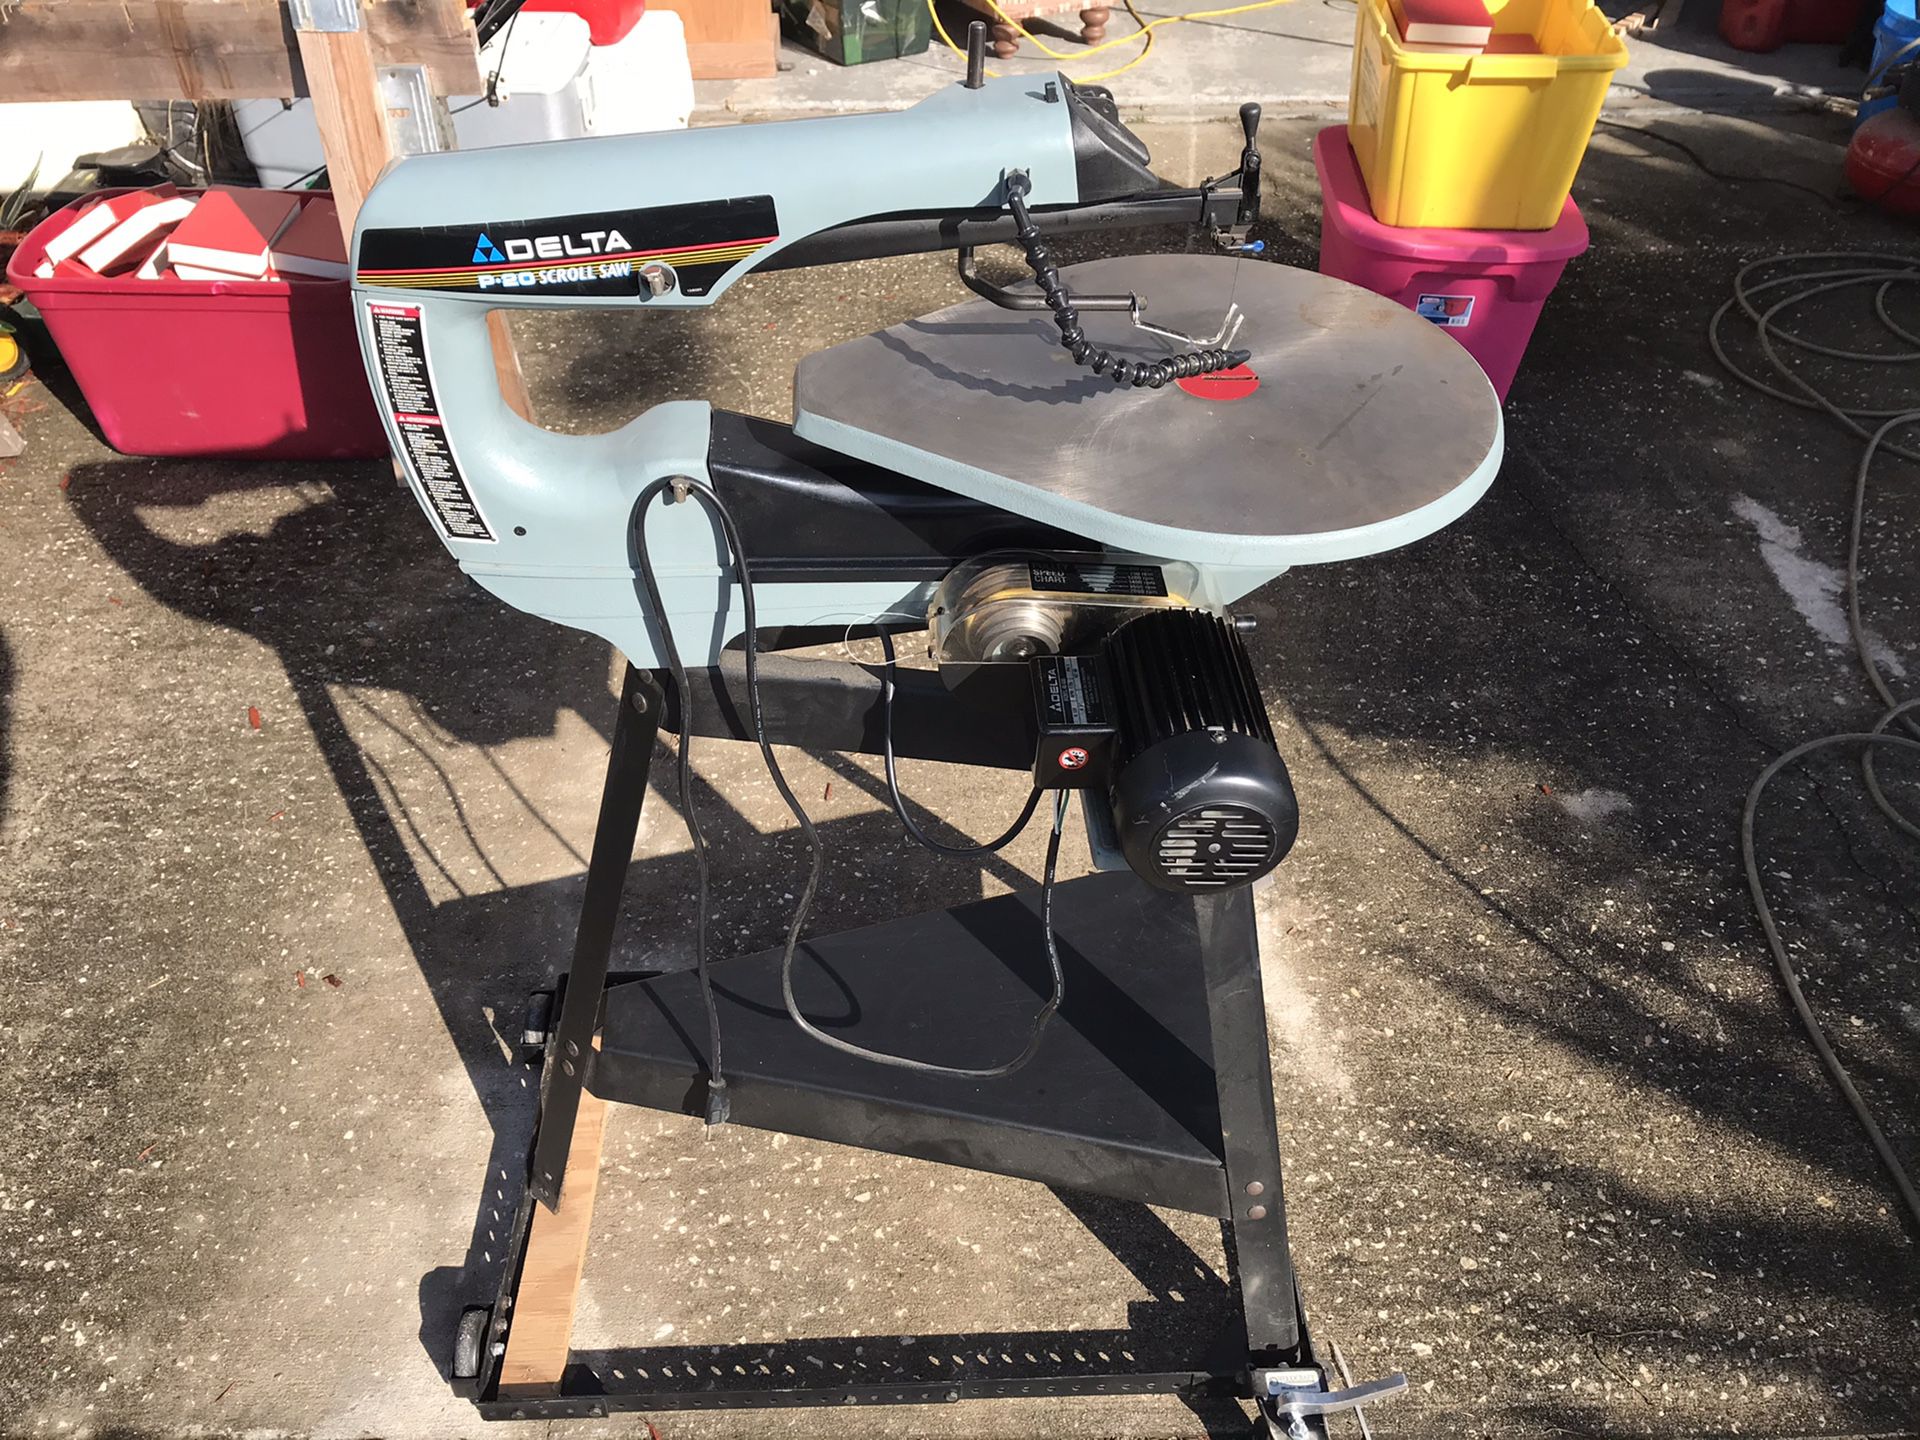 Delta Scroll saw with stand and wheels